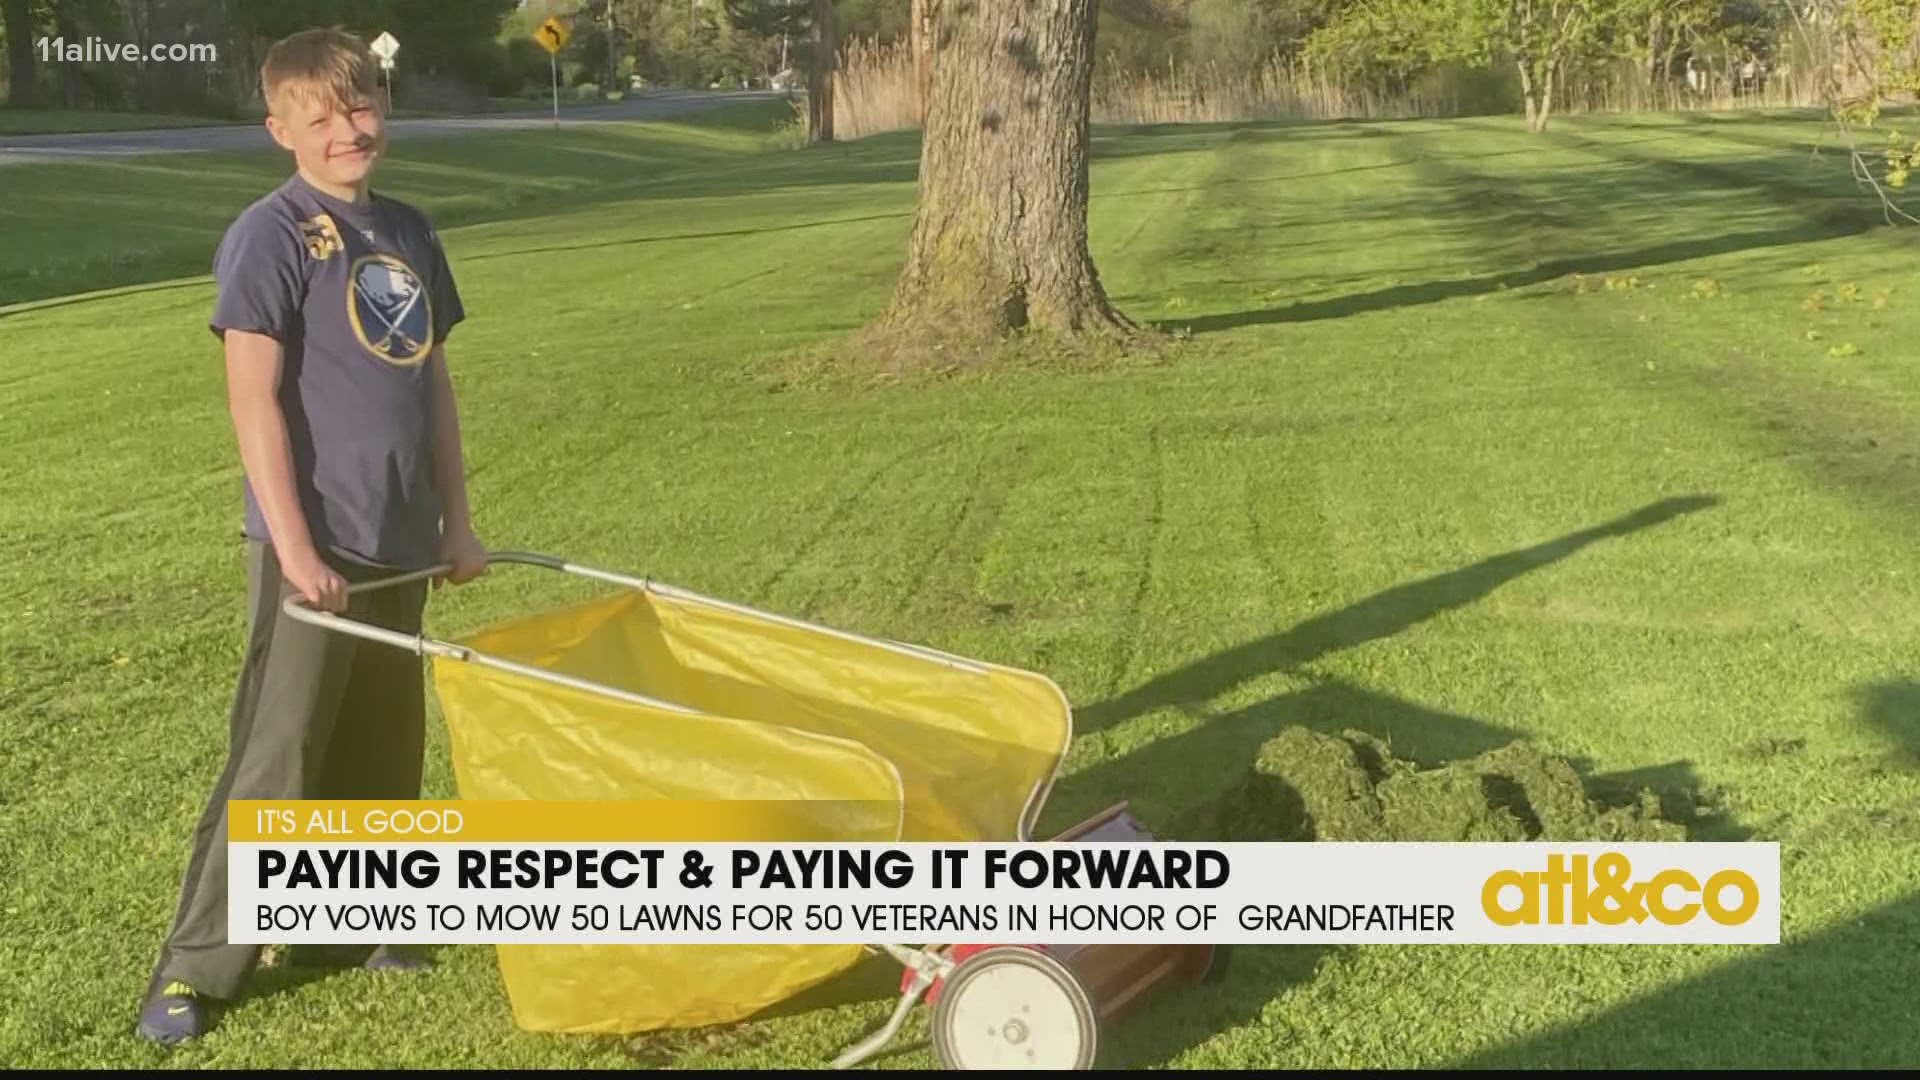 14-year-old Nathan is mowing veterans' lawns for free, in memory of his late grandfather.